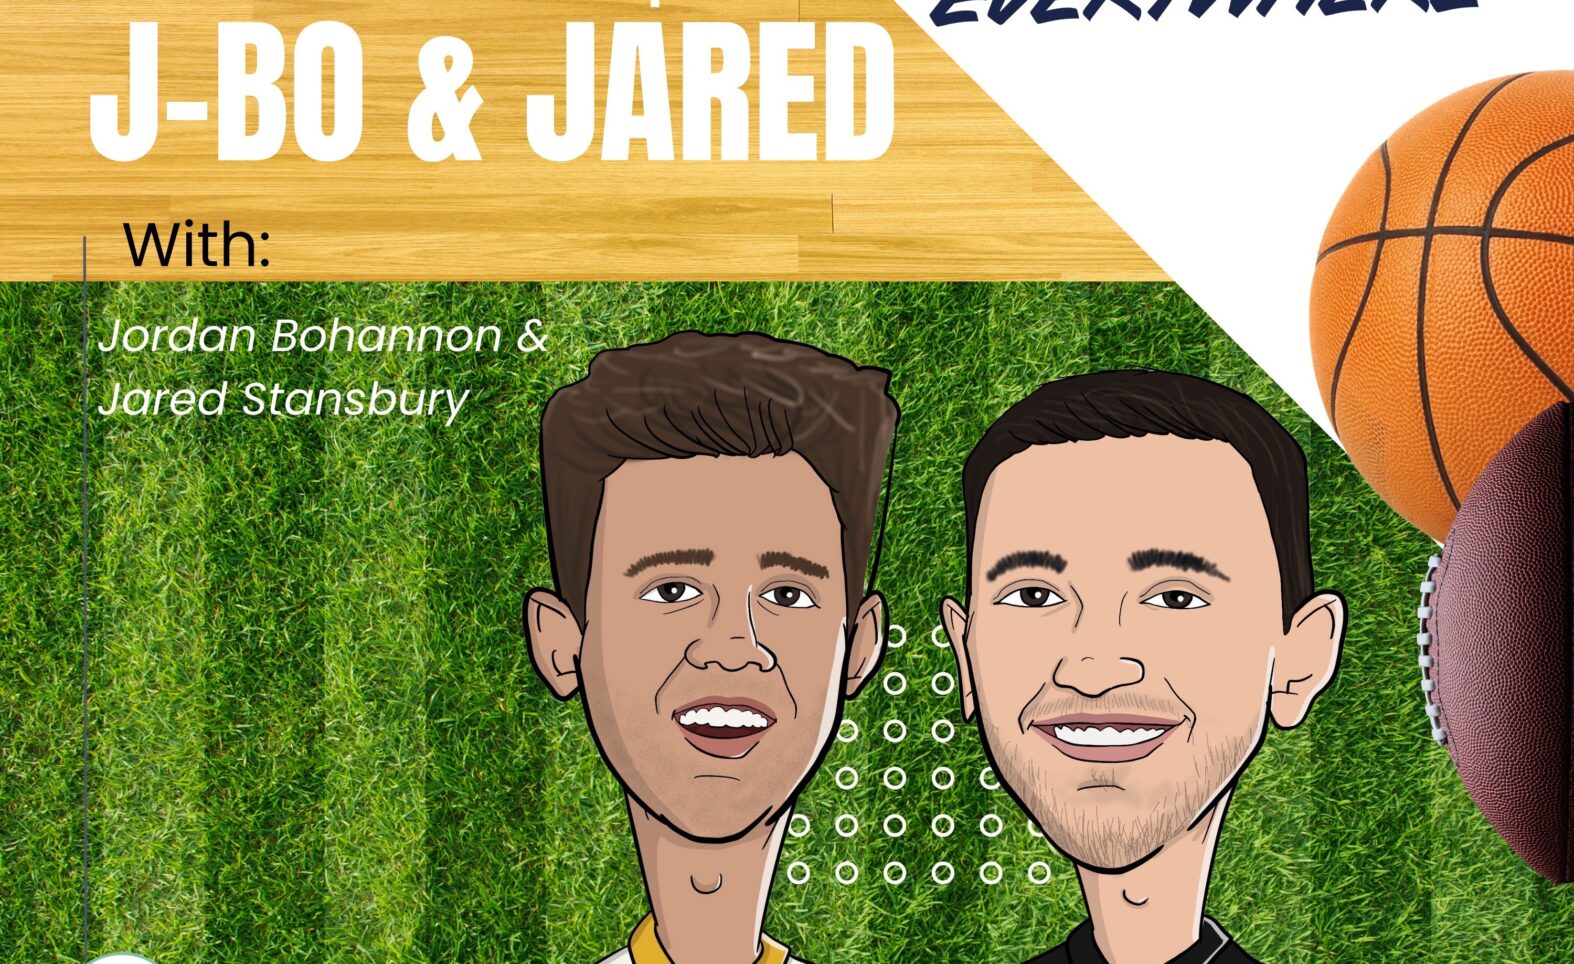 J-Bo & Jared: Diving deep into champs week